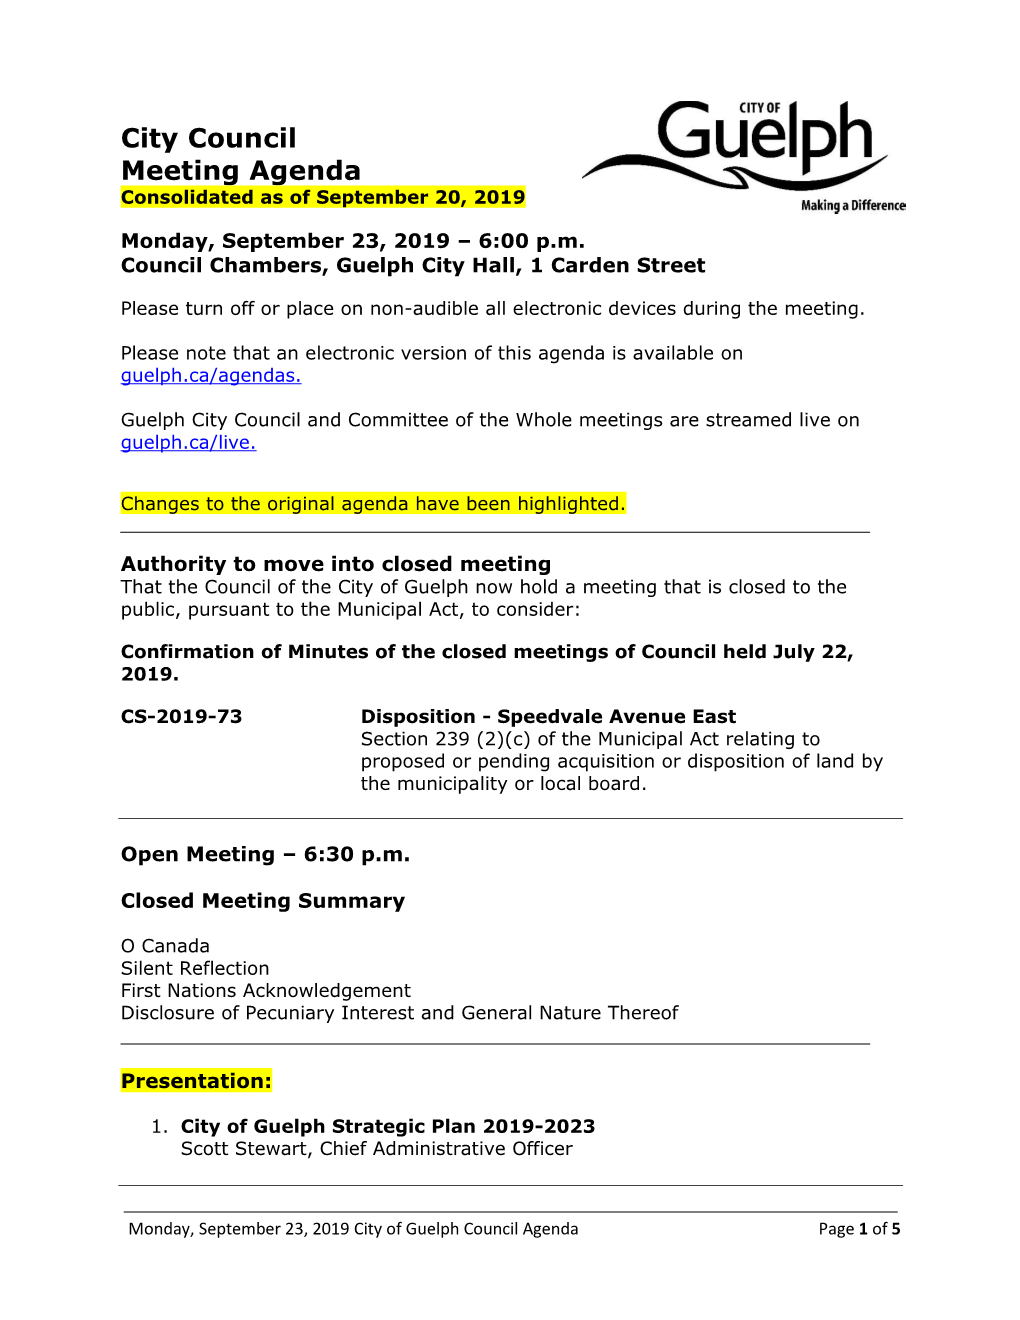 City Council Meeting Agenda Consolidated As of September 20, 2019